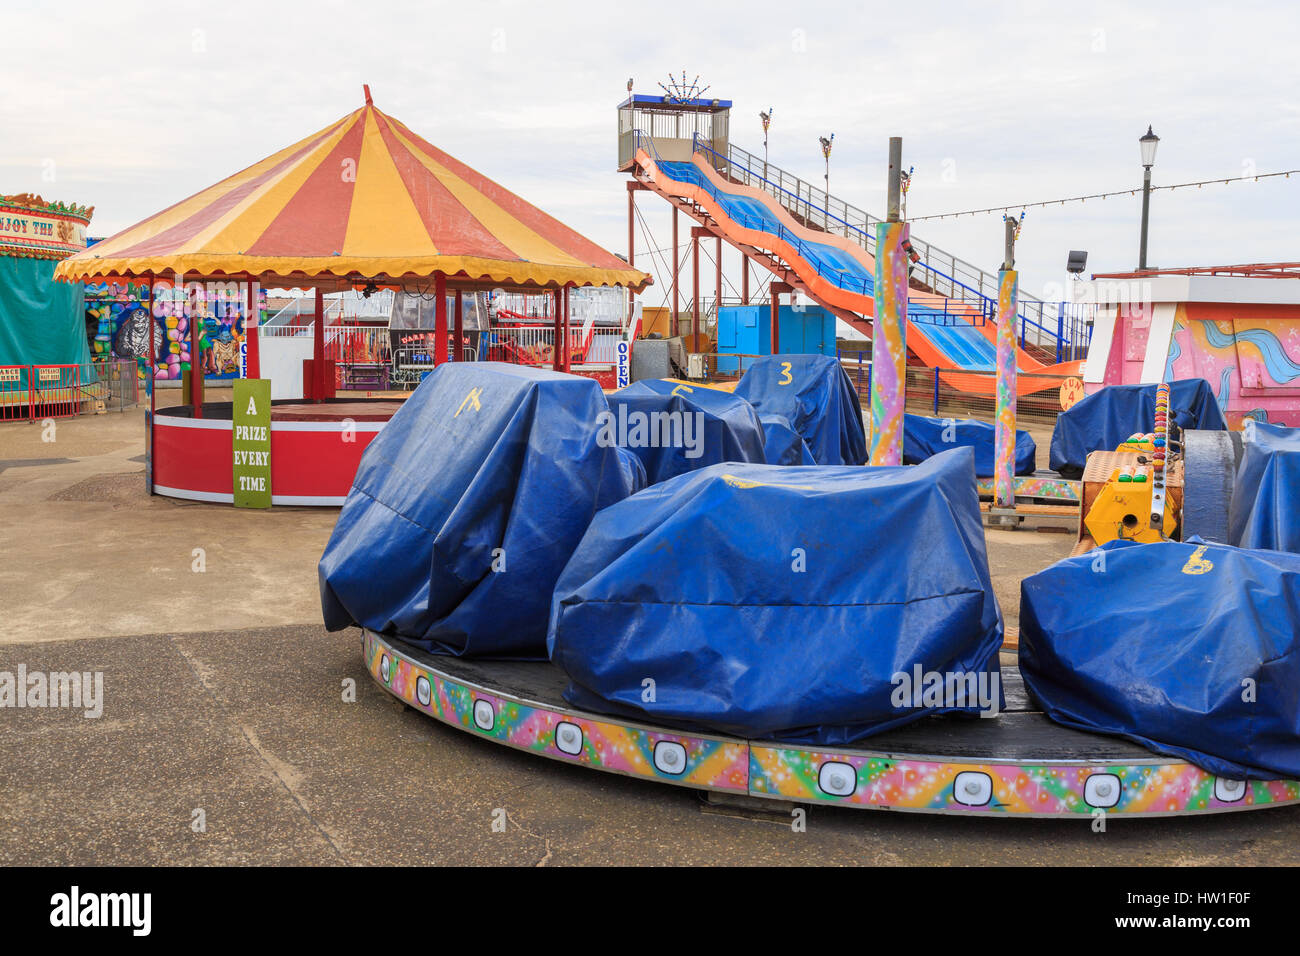 HUNSTANTON, ENGLAND - MARCH 10: Hunstanton fairground rides during closed/off time. In Hunstanton, Norfolk, England. On 10th March 2017. Stock Photo